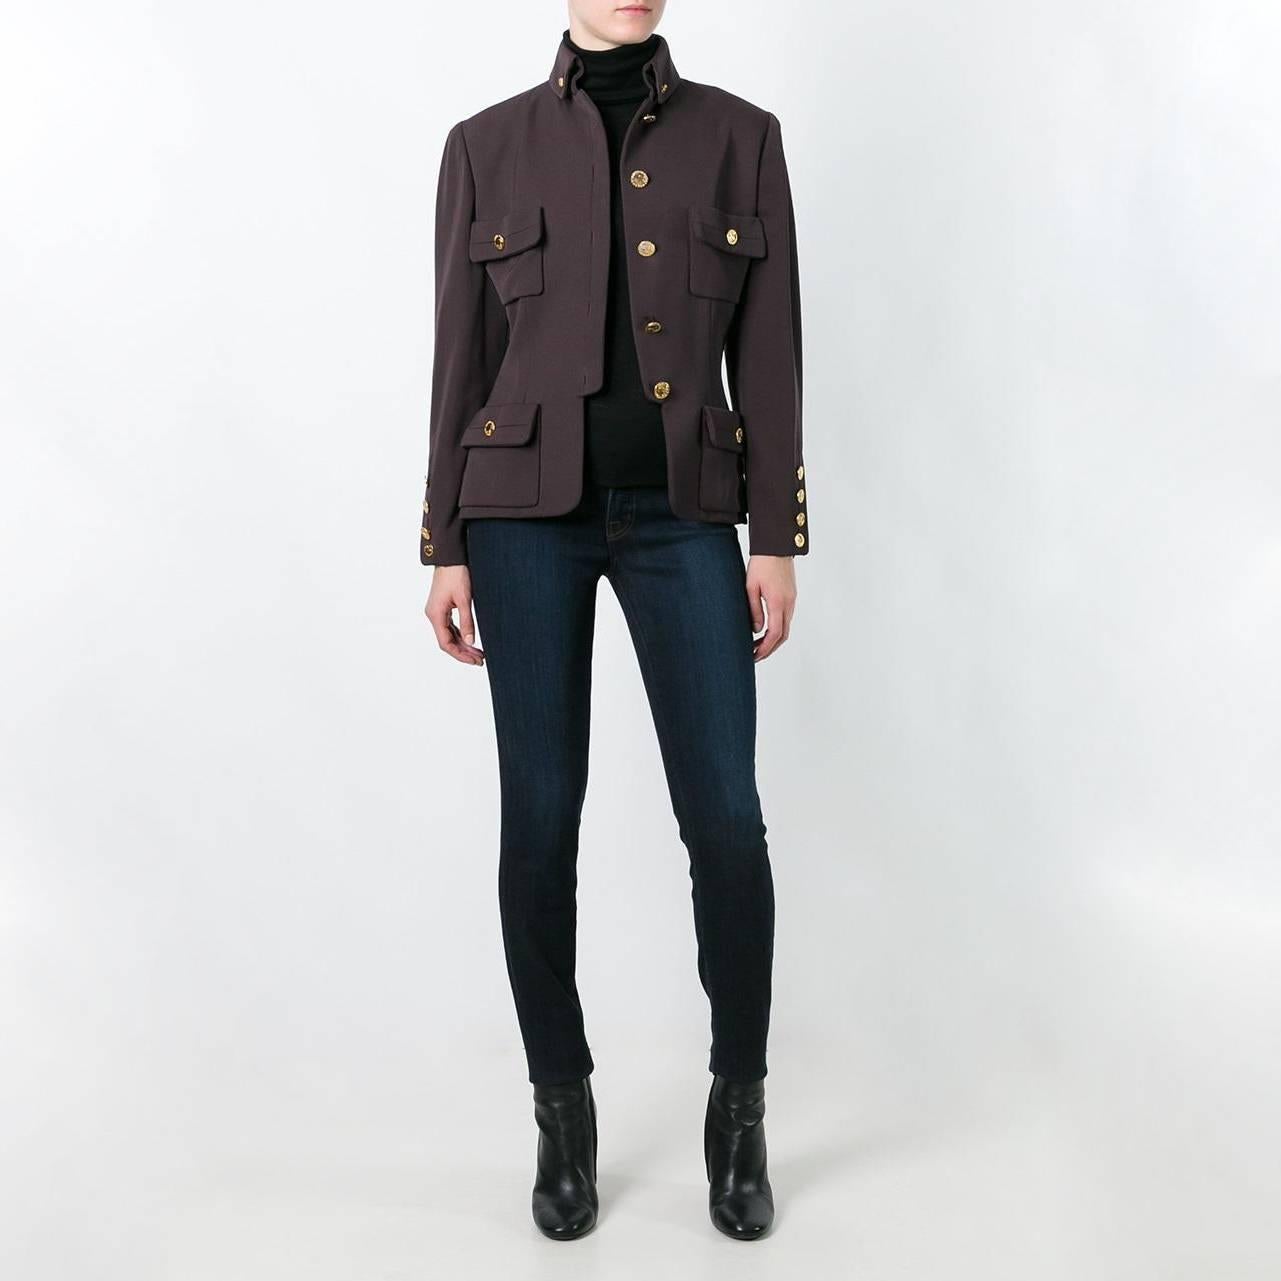 Ornately embellished with gold-tone medallions, this vintage Chanel jacket is crafted from a brown wool gabardine. It was designed in 1985-86, at which point Karl Lagerfeld had only recently been inducted to the role of creative director. In a